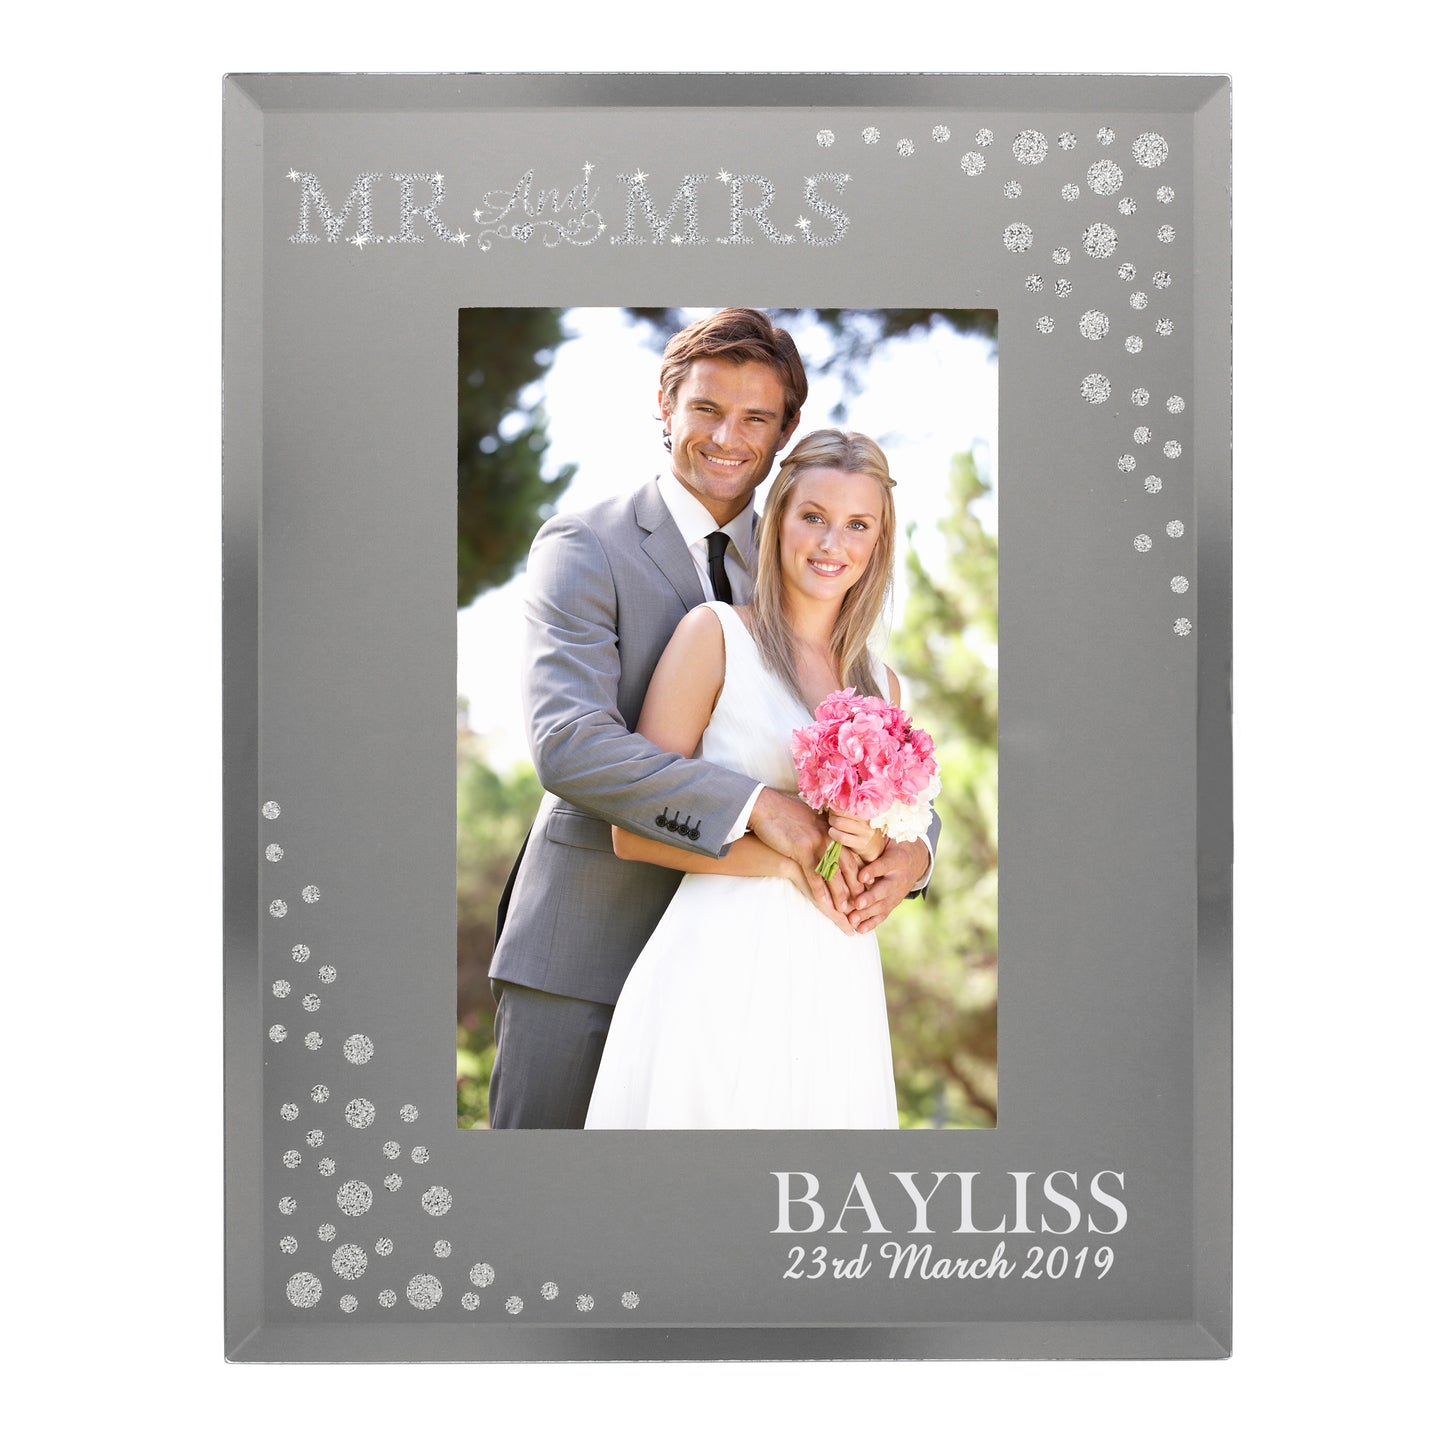 Personalised Mr and Mrs 4x6 Diamante Glass Photo Frame - Personalise It!